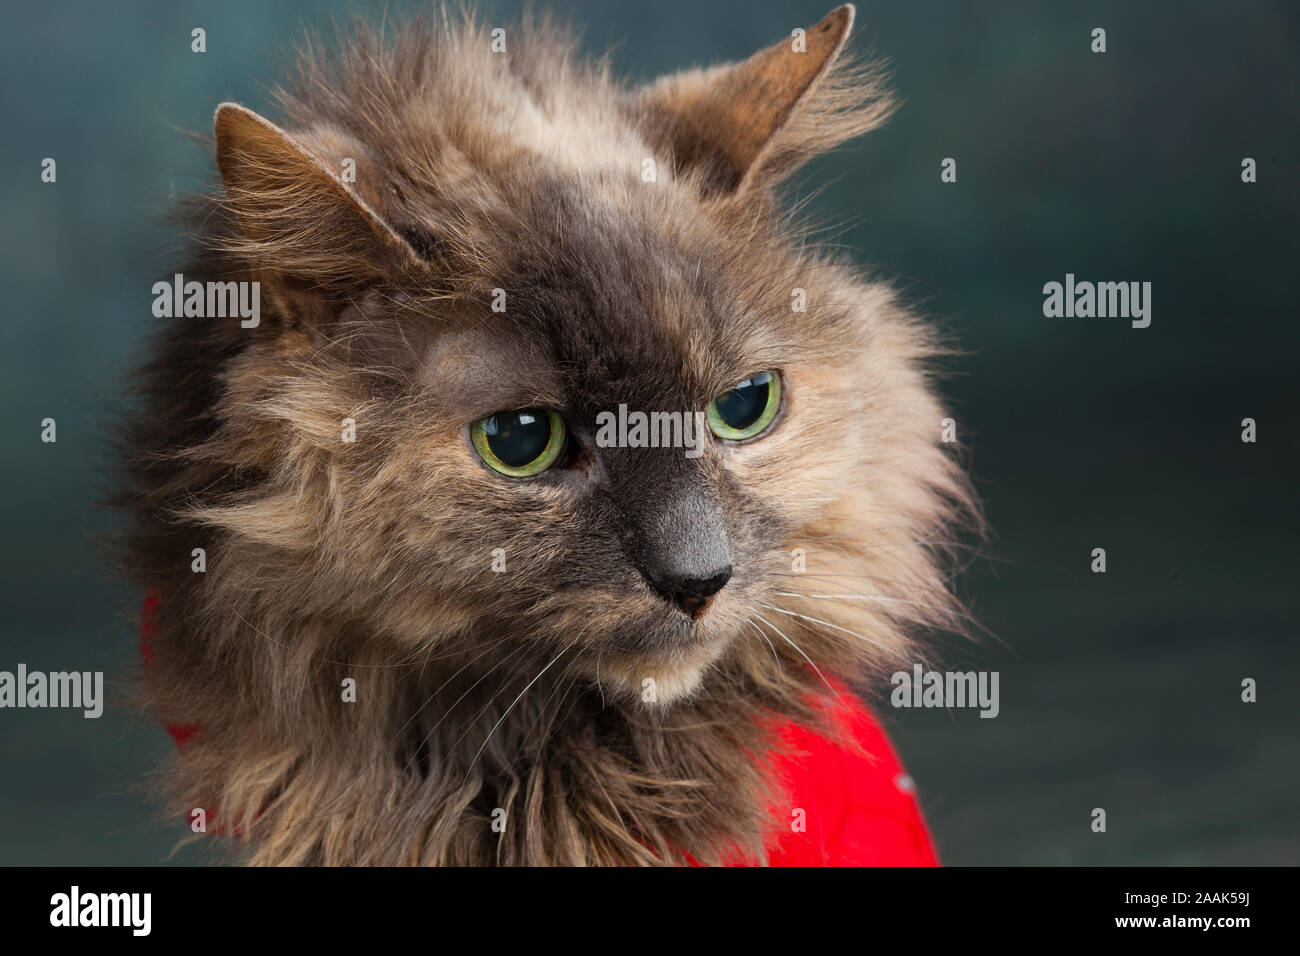 Close-up of Long haired cat wearing red vest Banque D'Images